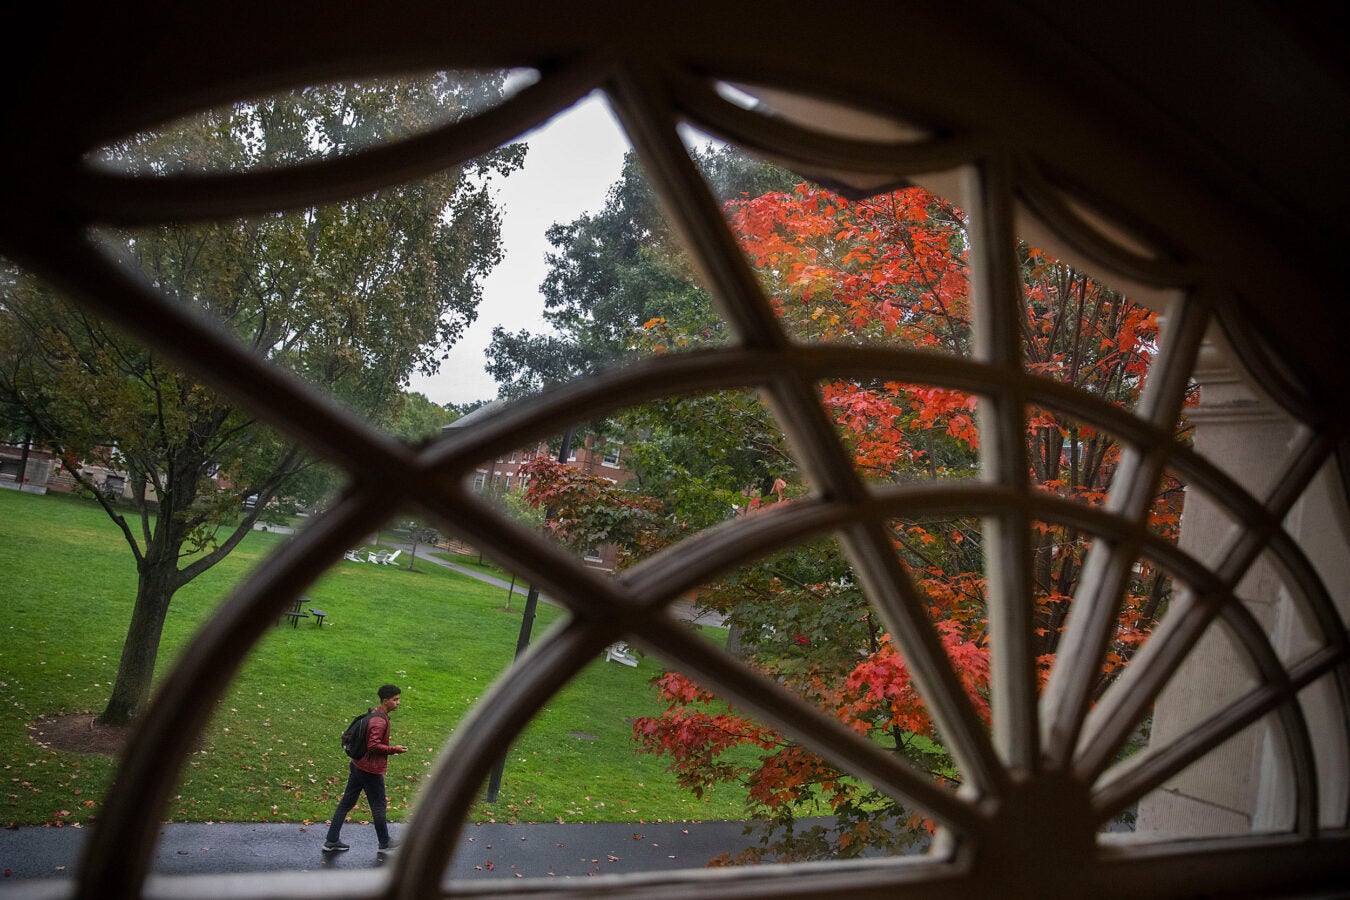 A student walking by a window with a frame that looks like a metal spider web.